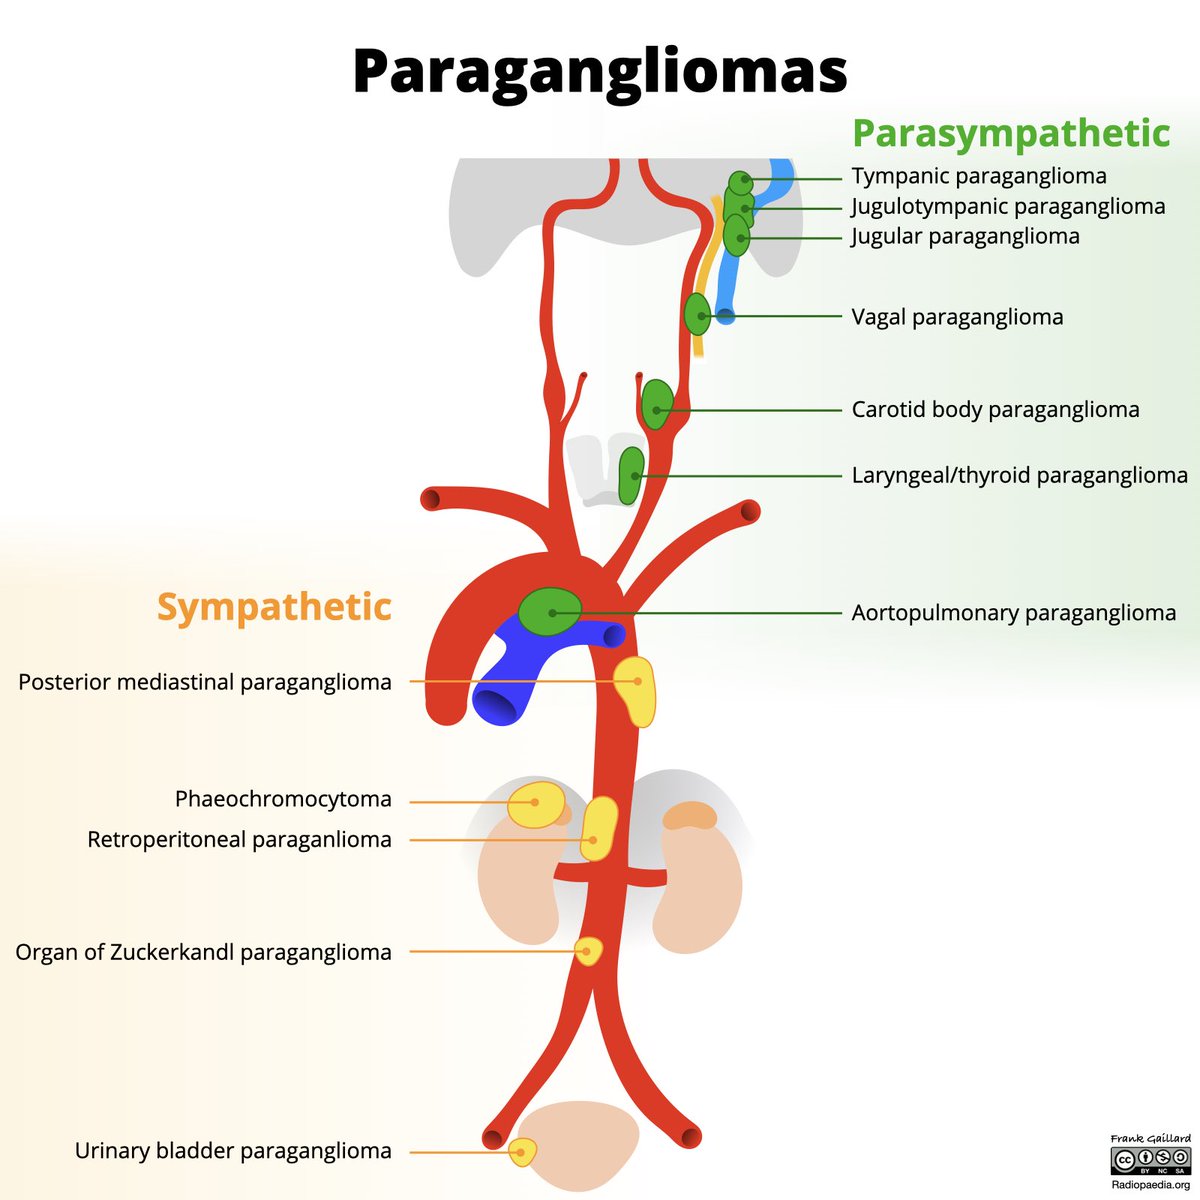 This week on the @Radiopaedia Reading Room Podcast I was joined by @SalAyesa for a “readful” episode all about paragangliomas! Plus Hamlet, possums, Eurydice and an apology to the fine people of Bundaberg, QLD. 🎧 radiopaedia.org/podcast #foamrad